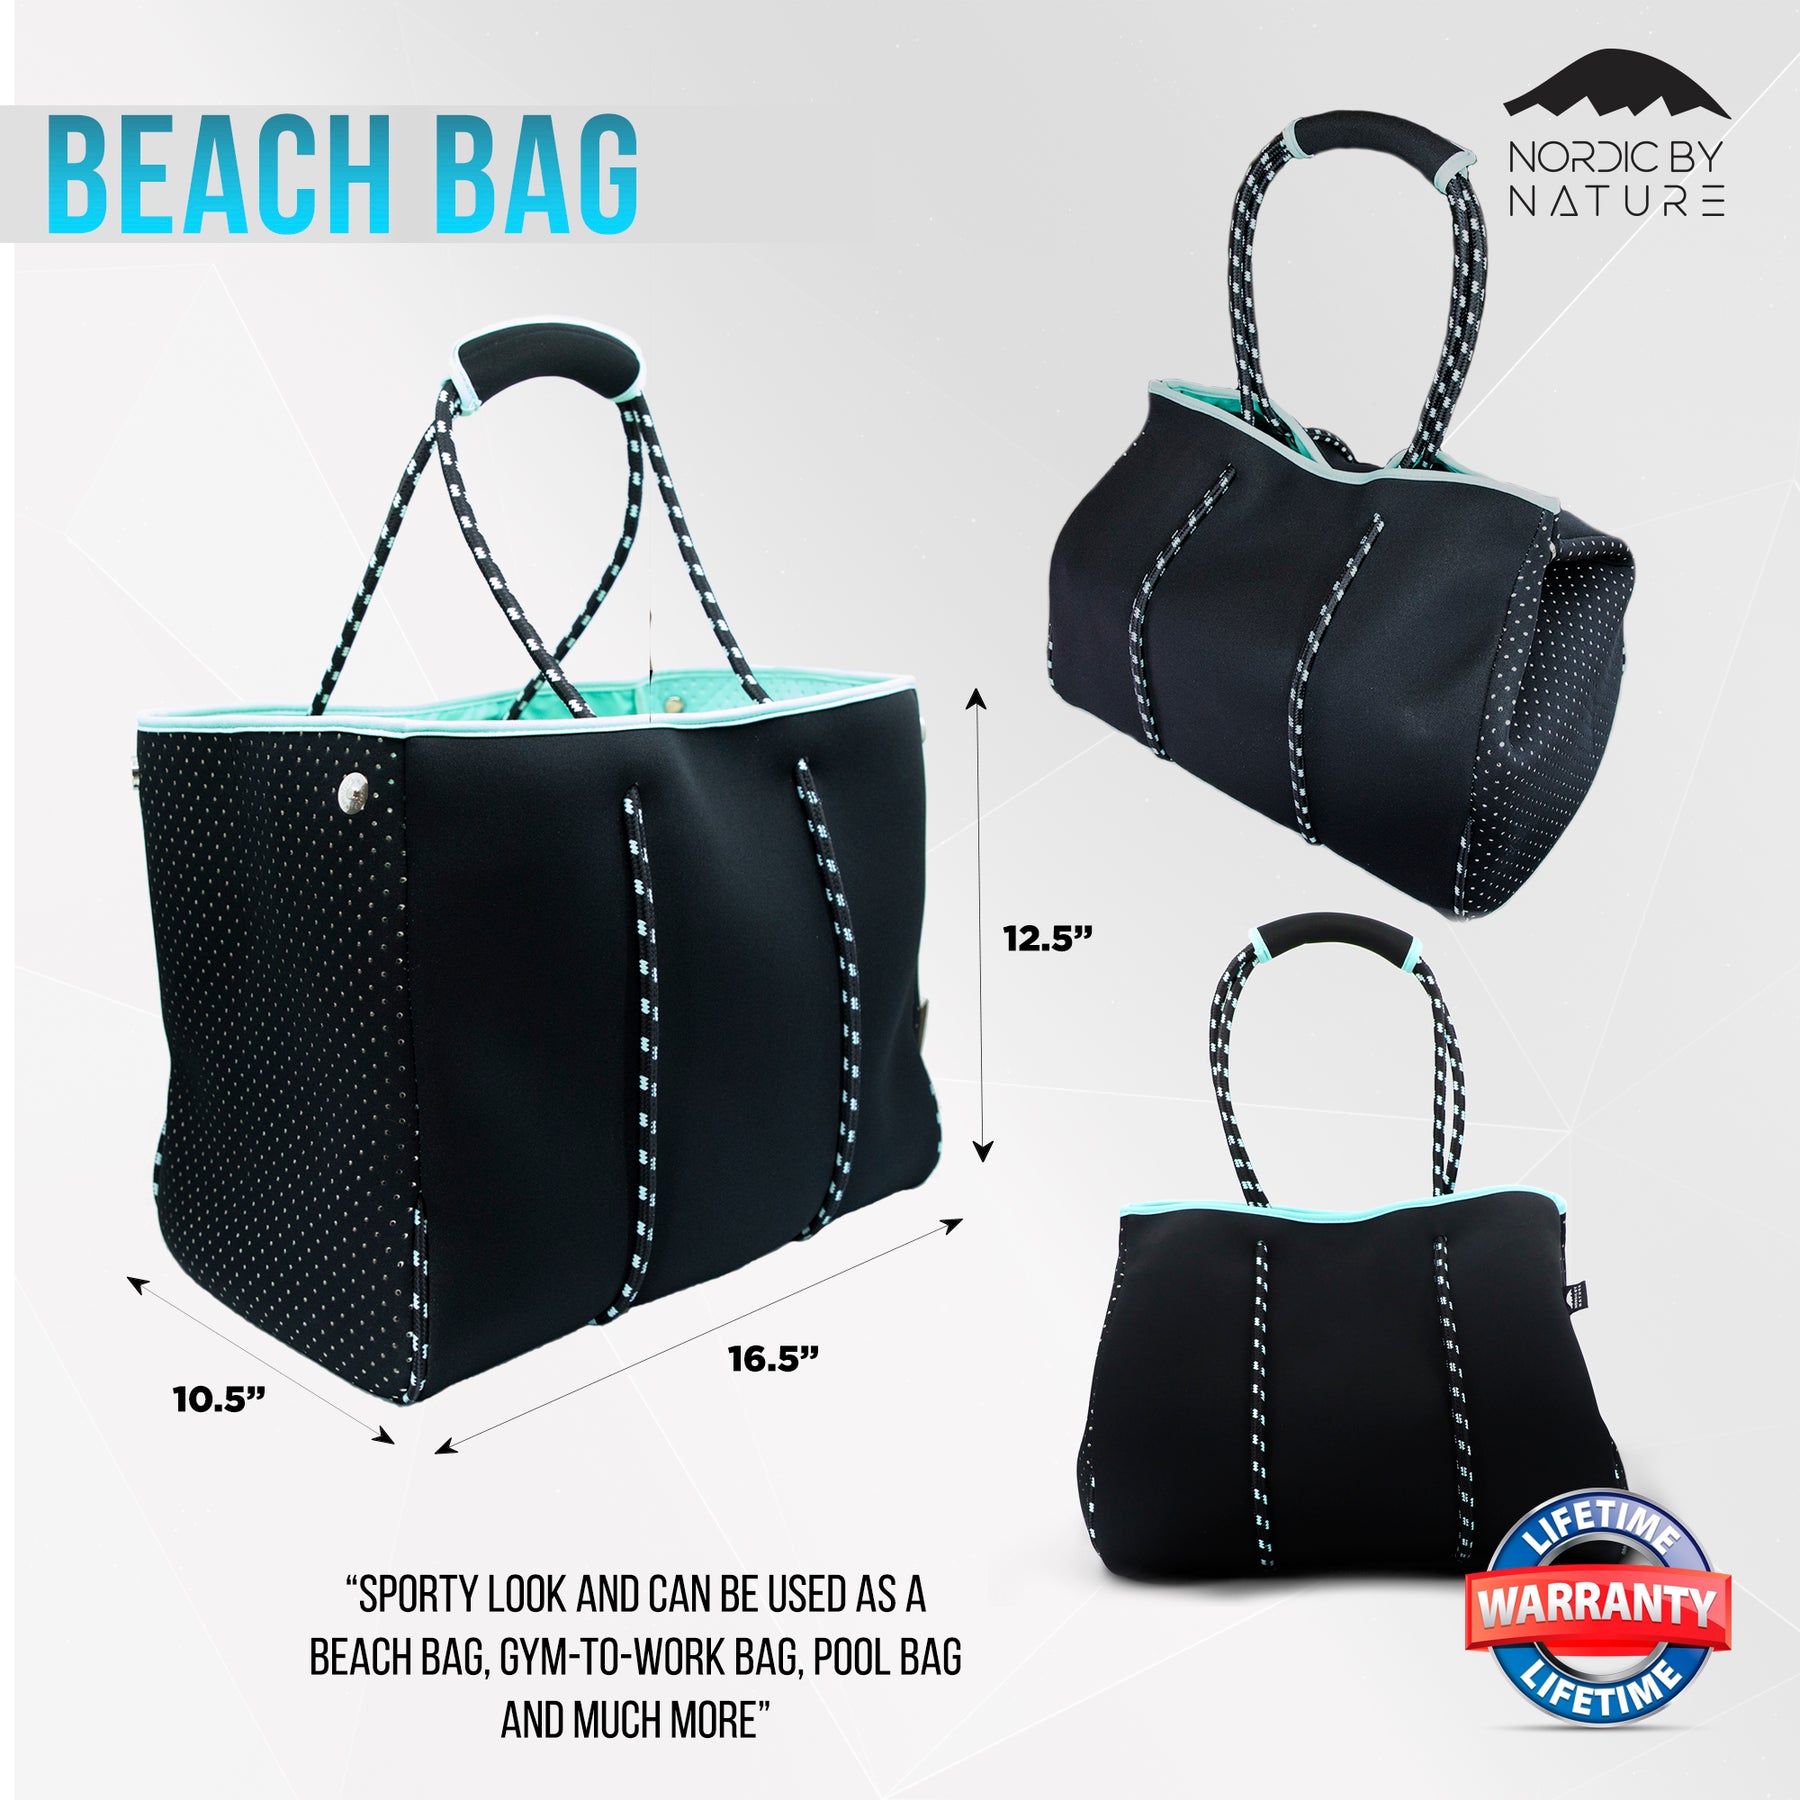  Nordic By Nature Large Designer Beach Bag Tote For Women & Men  (Black & White/Turquoise) : Home & Kitchen